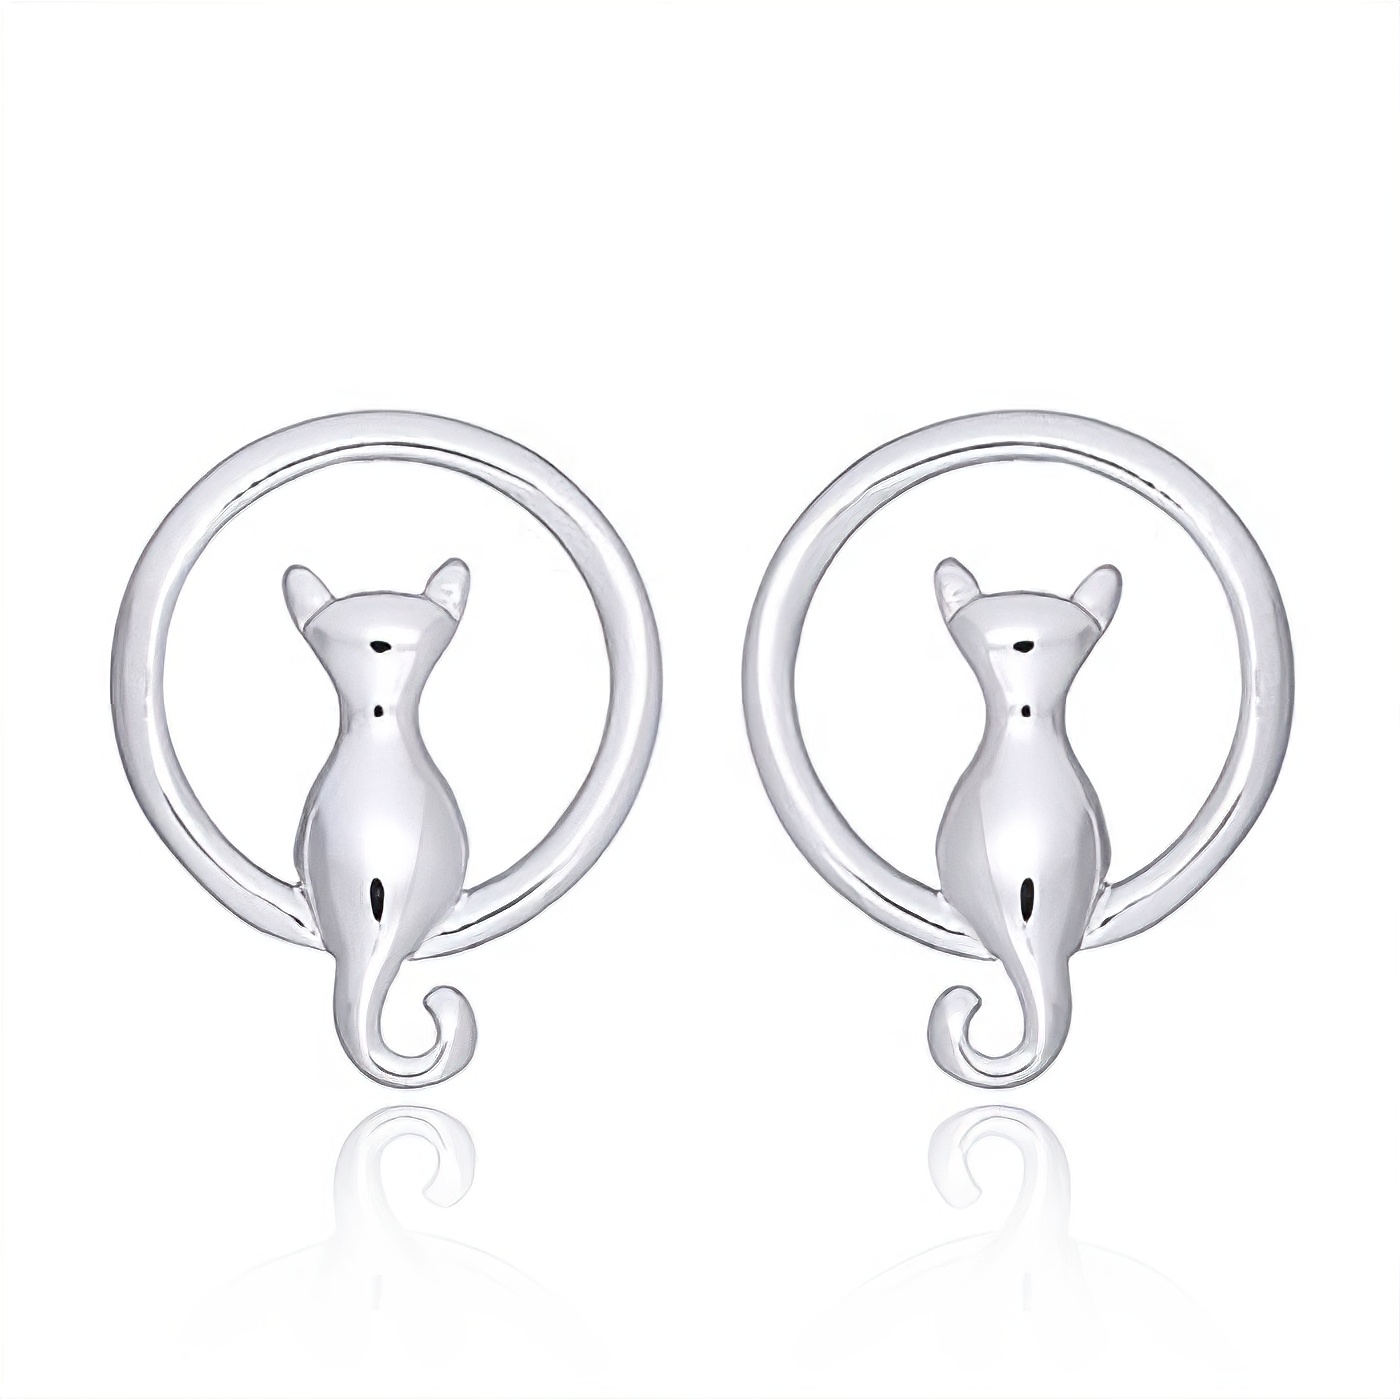 Lonely Kitty In Crescent Moon Silver Stud Earrings by BeYindi 